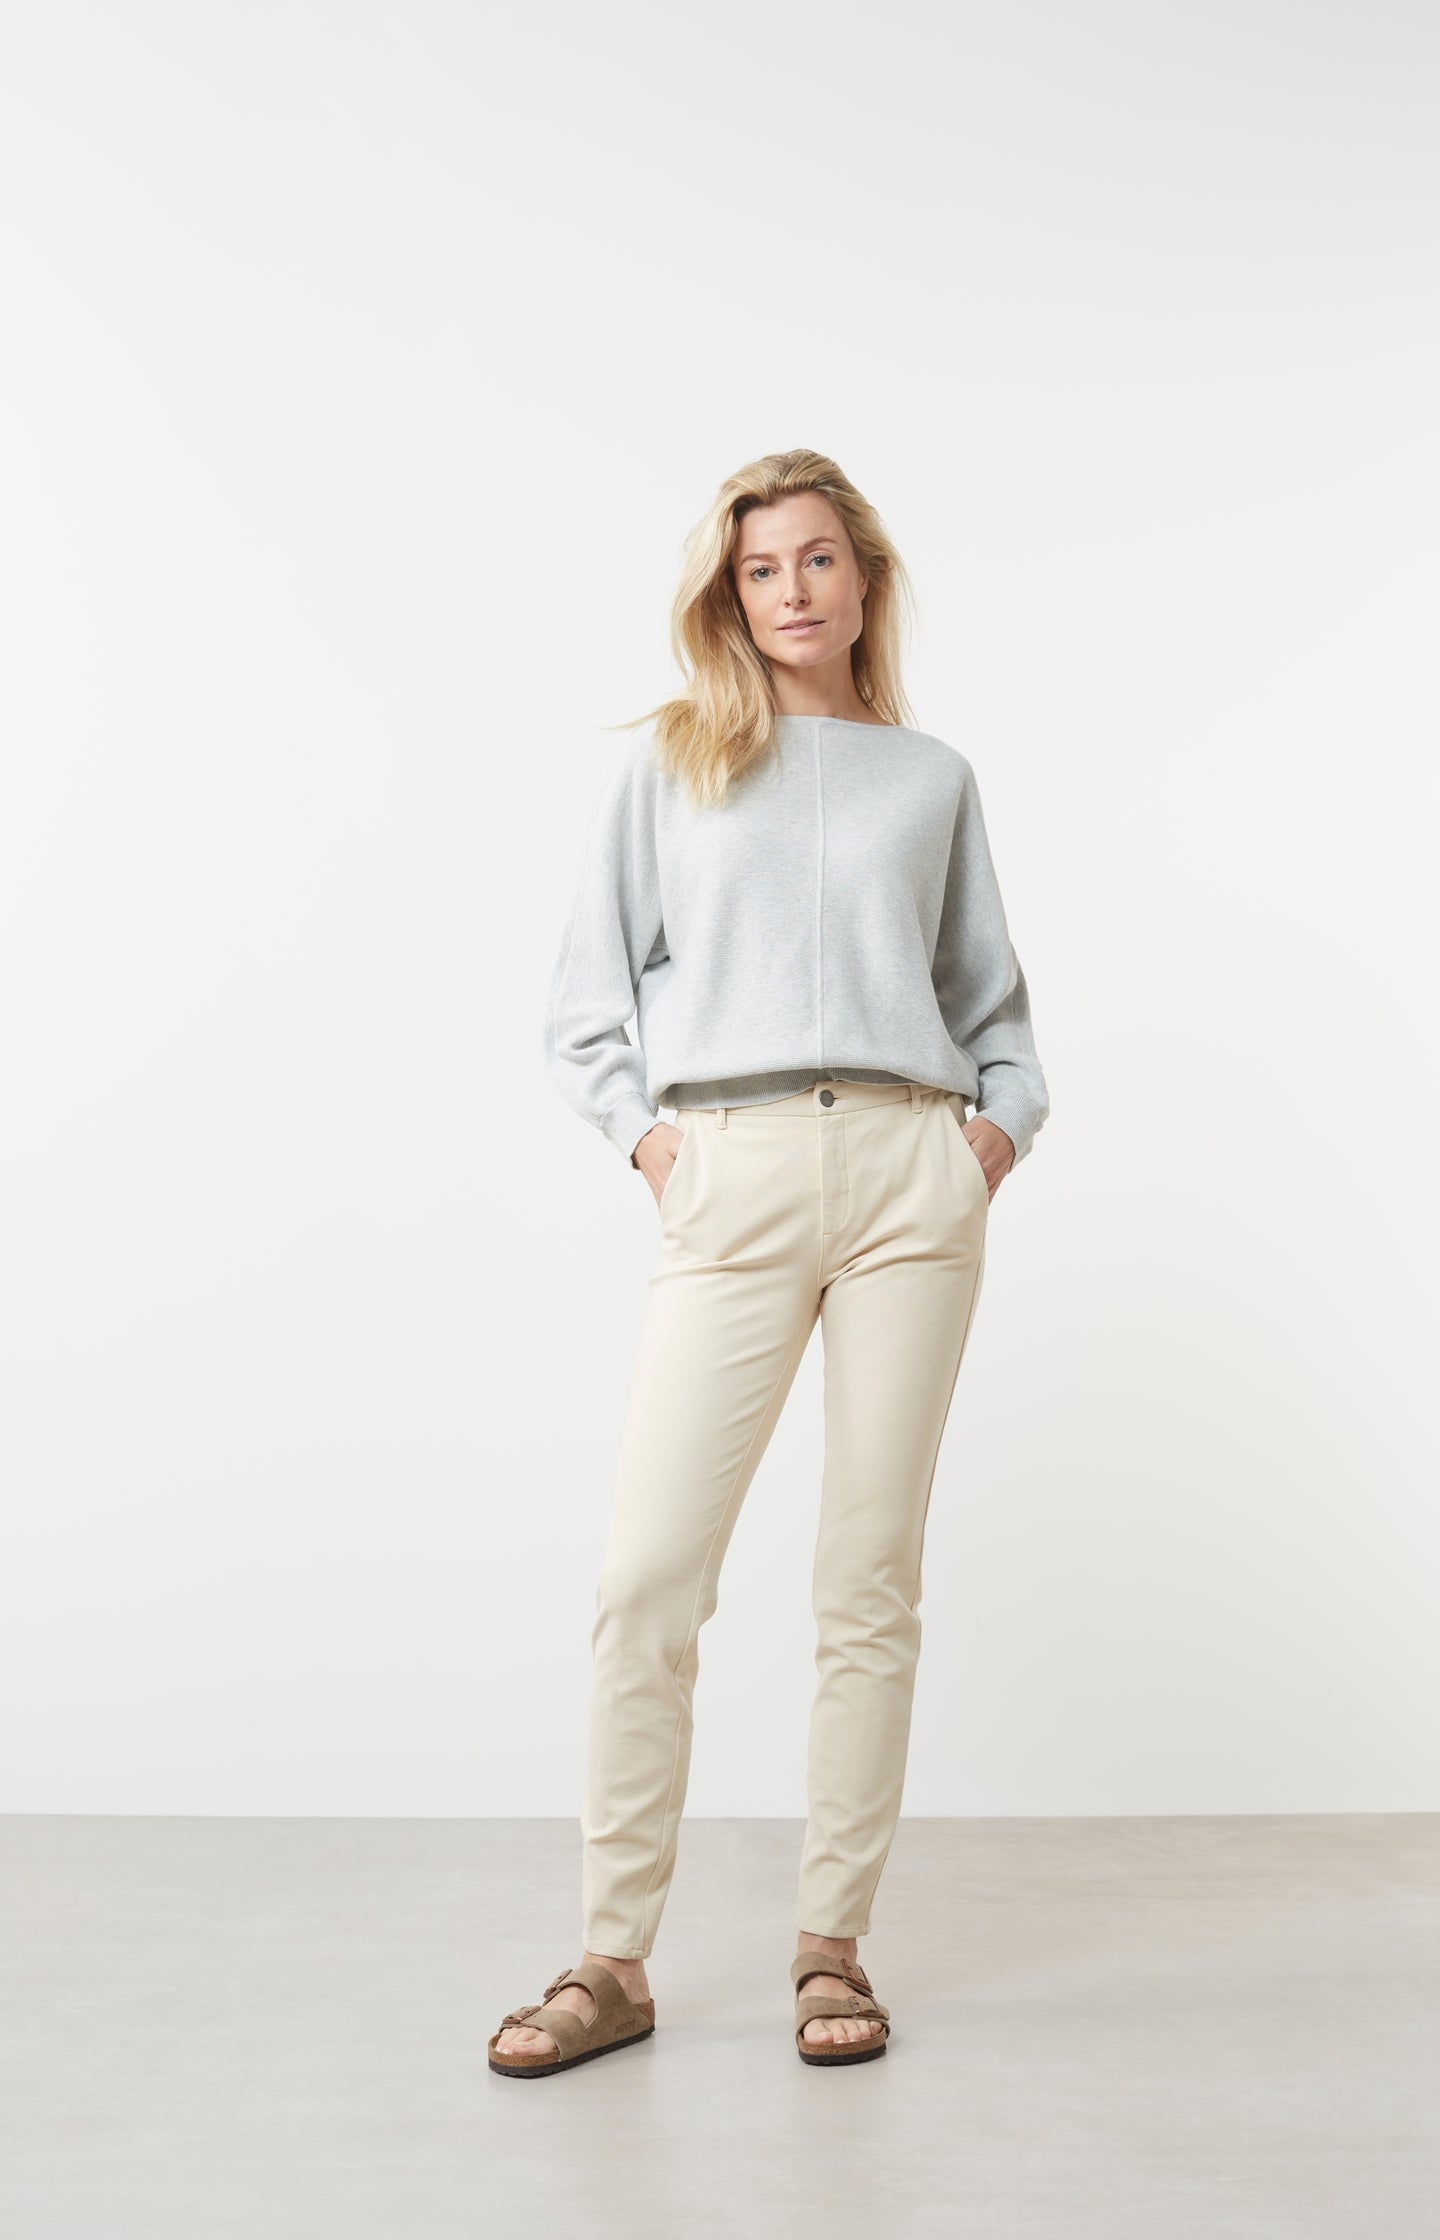 Boatneck sweater with long batwing sleeves in a relaxed fit